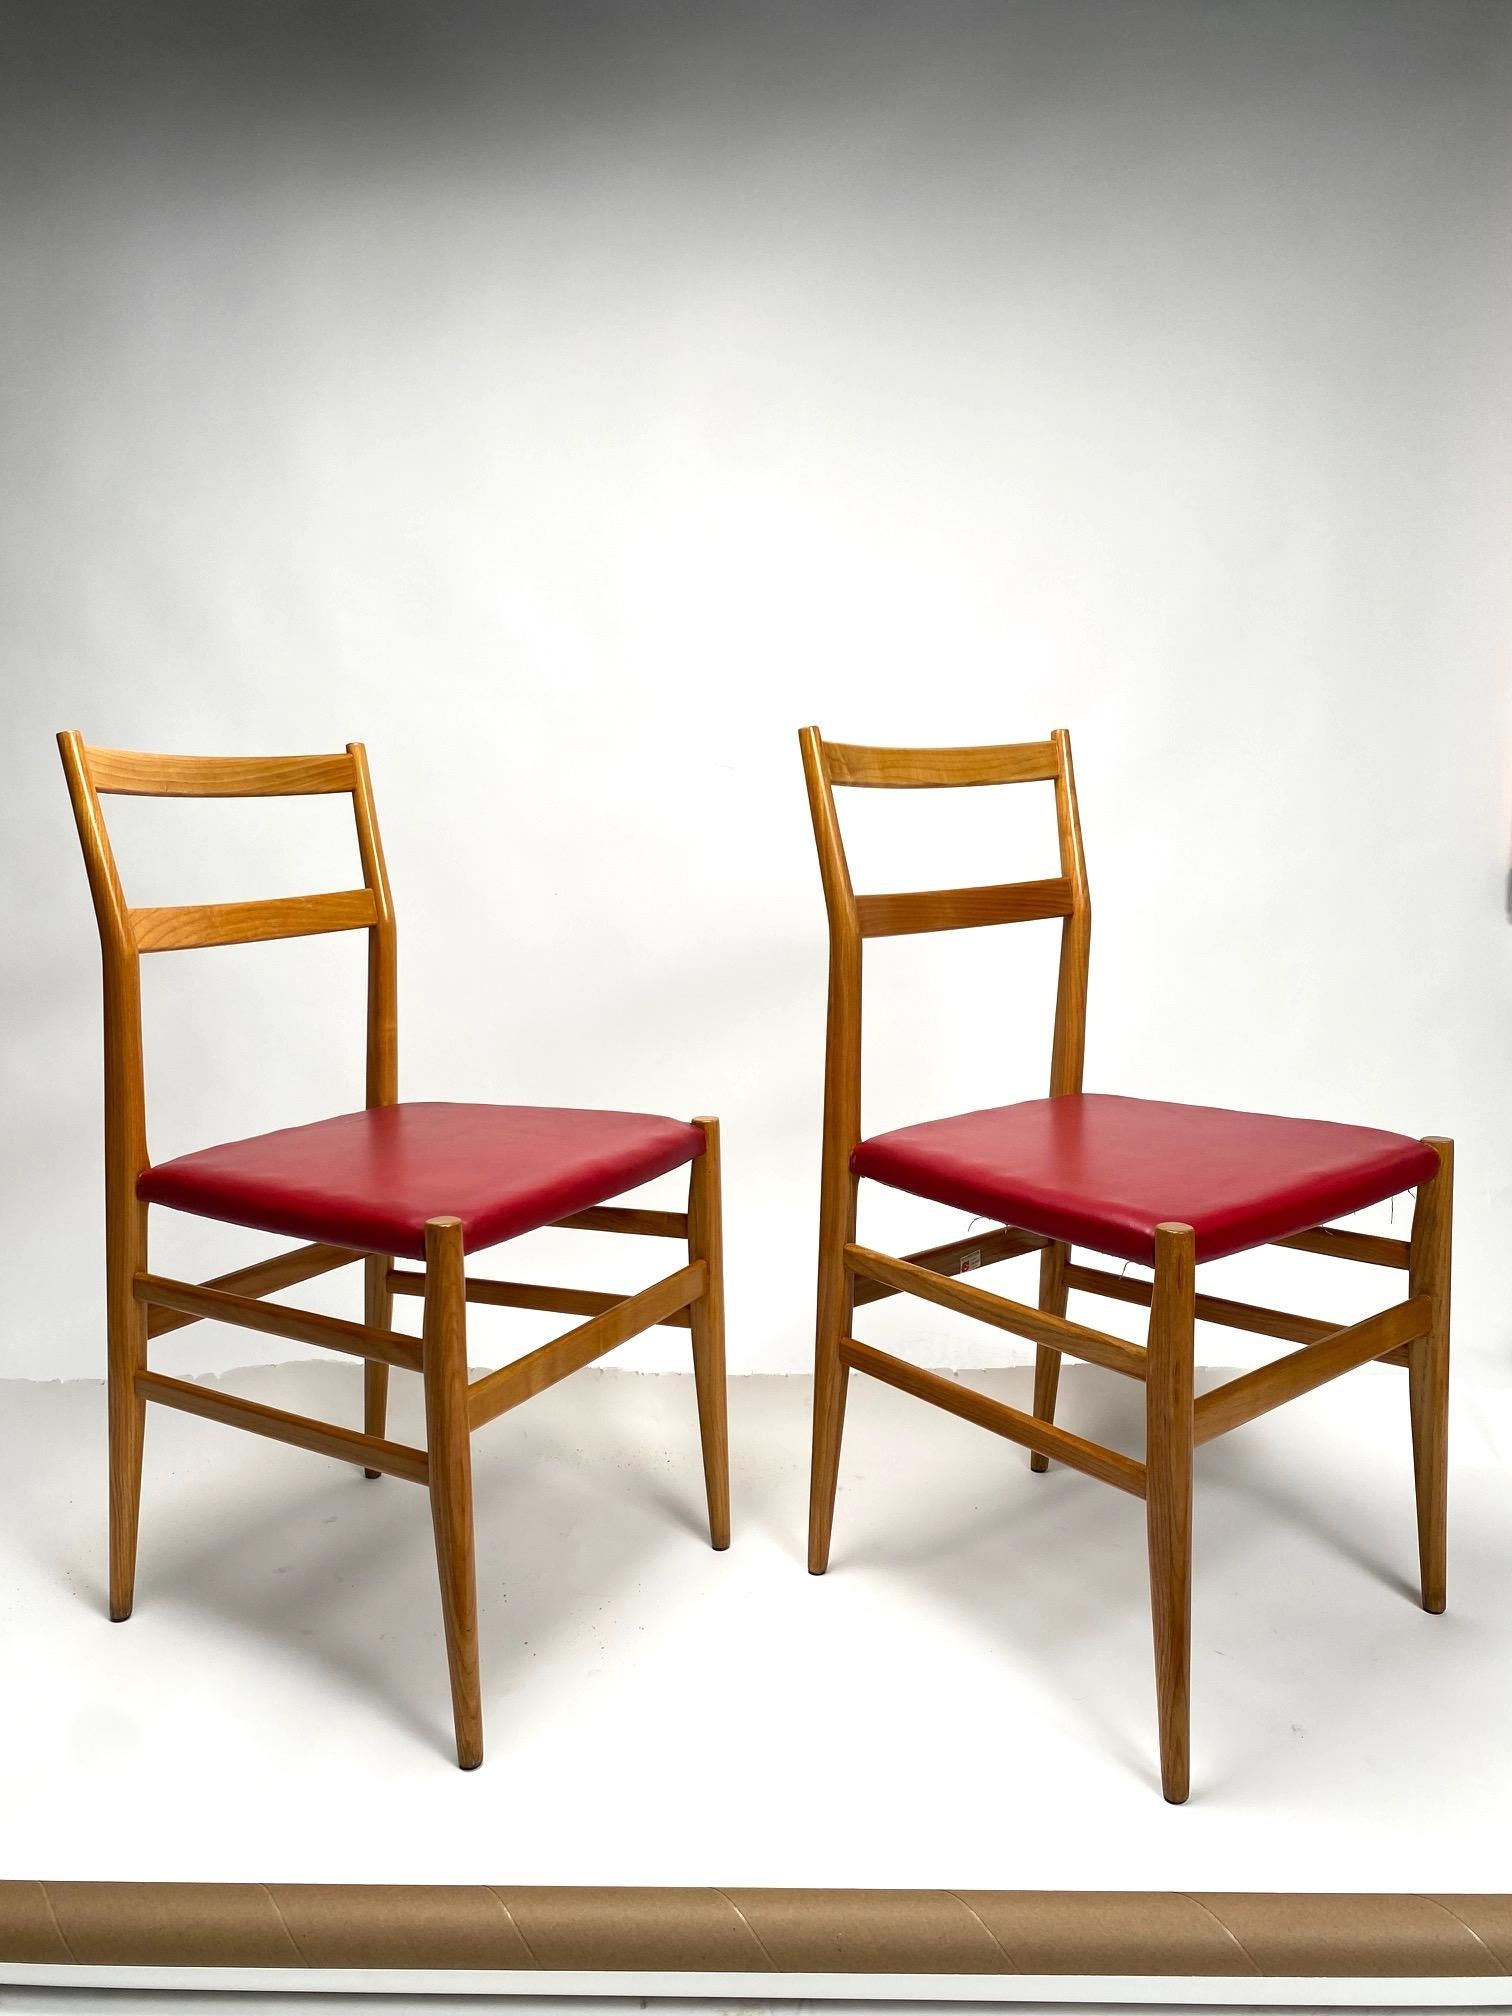 Pair of Leggera chairs in light wood, Gio Ponti, Cassina  (First Edition) For Sale 5